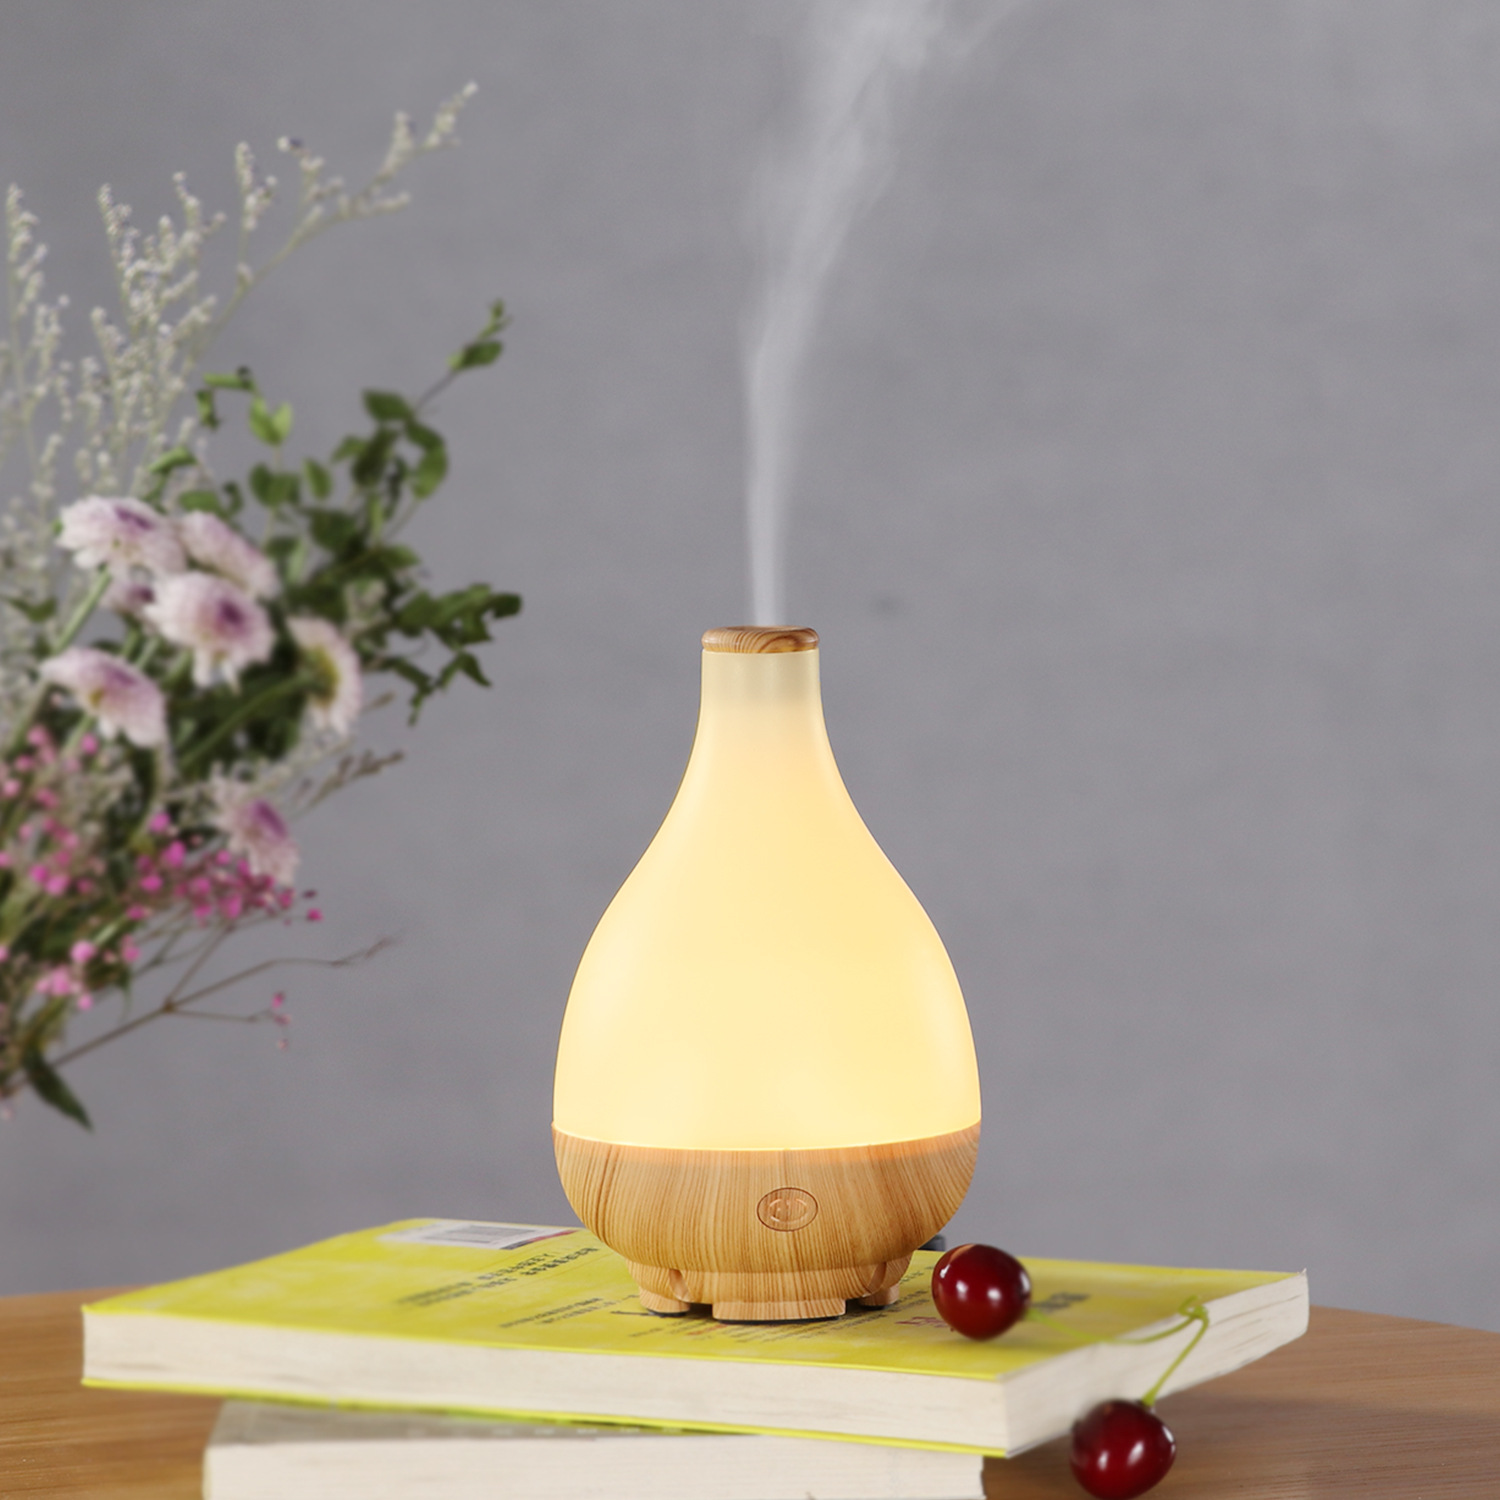 New Aroma Diffuser Humidifier Home Ultrasonic Air Purification Diffuser Indoor Fragrance Machine